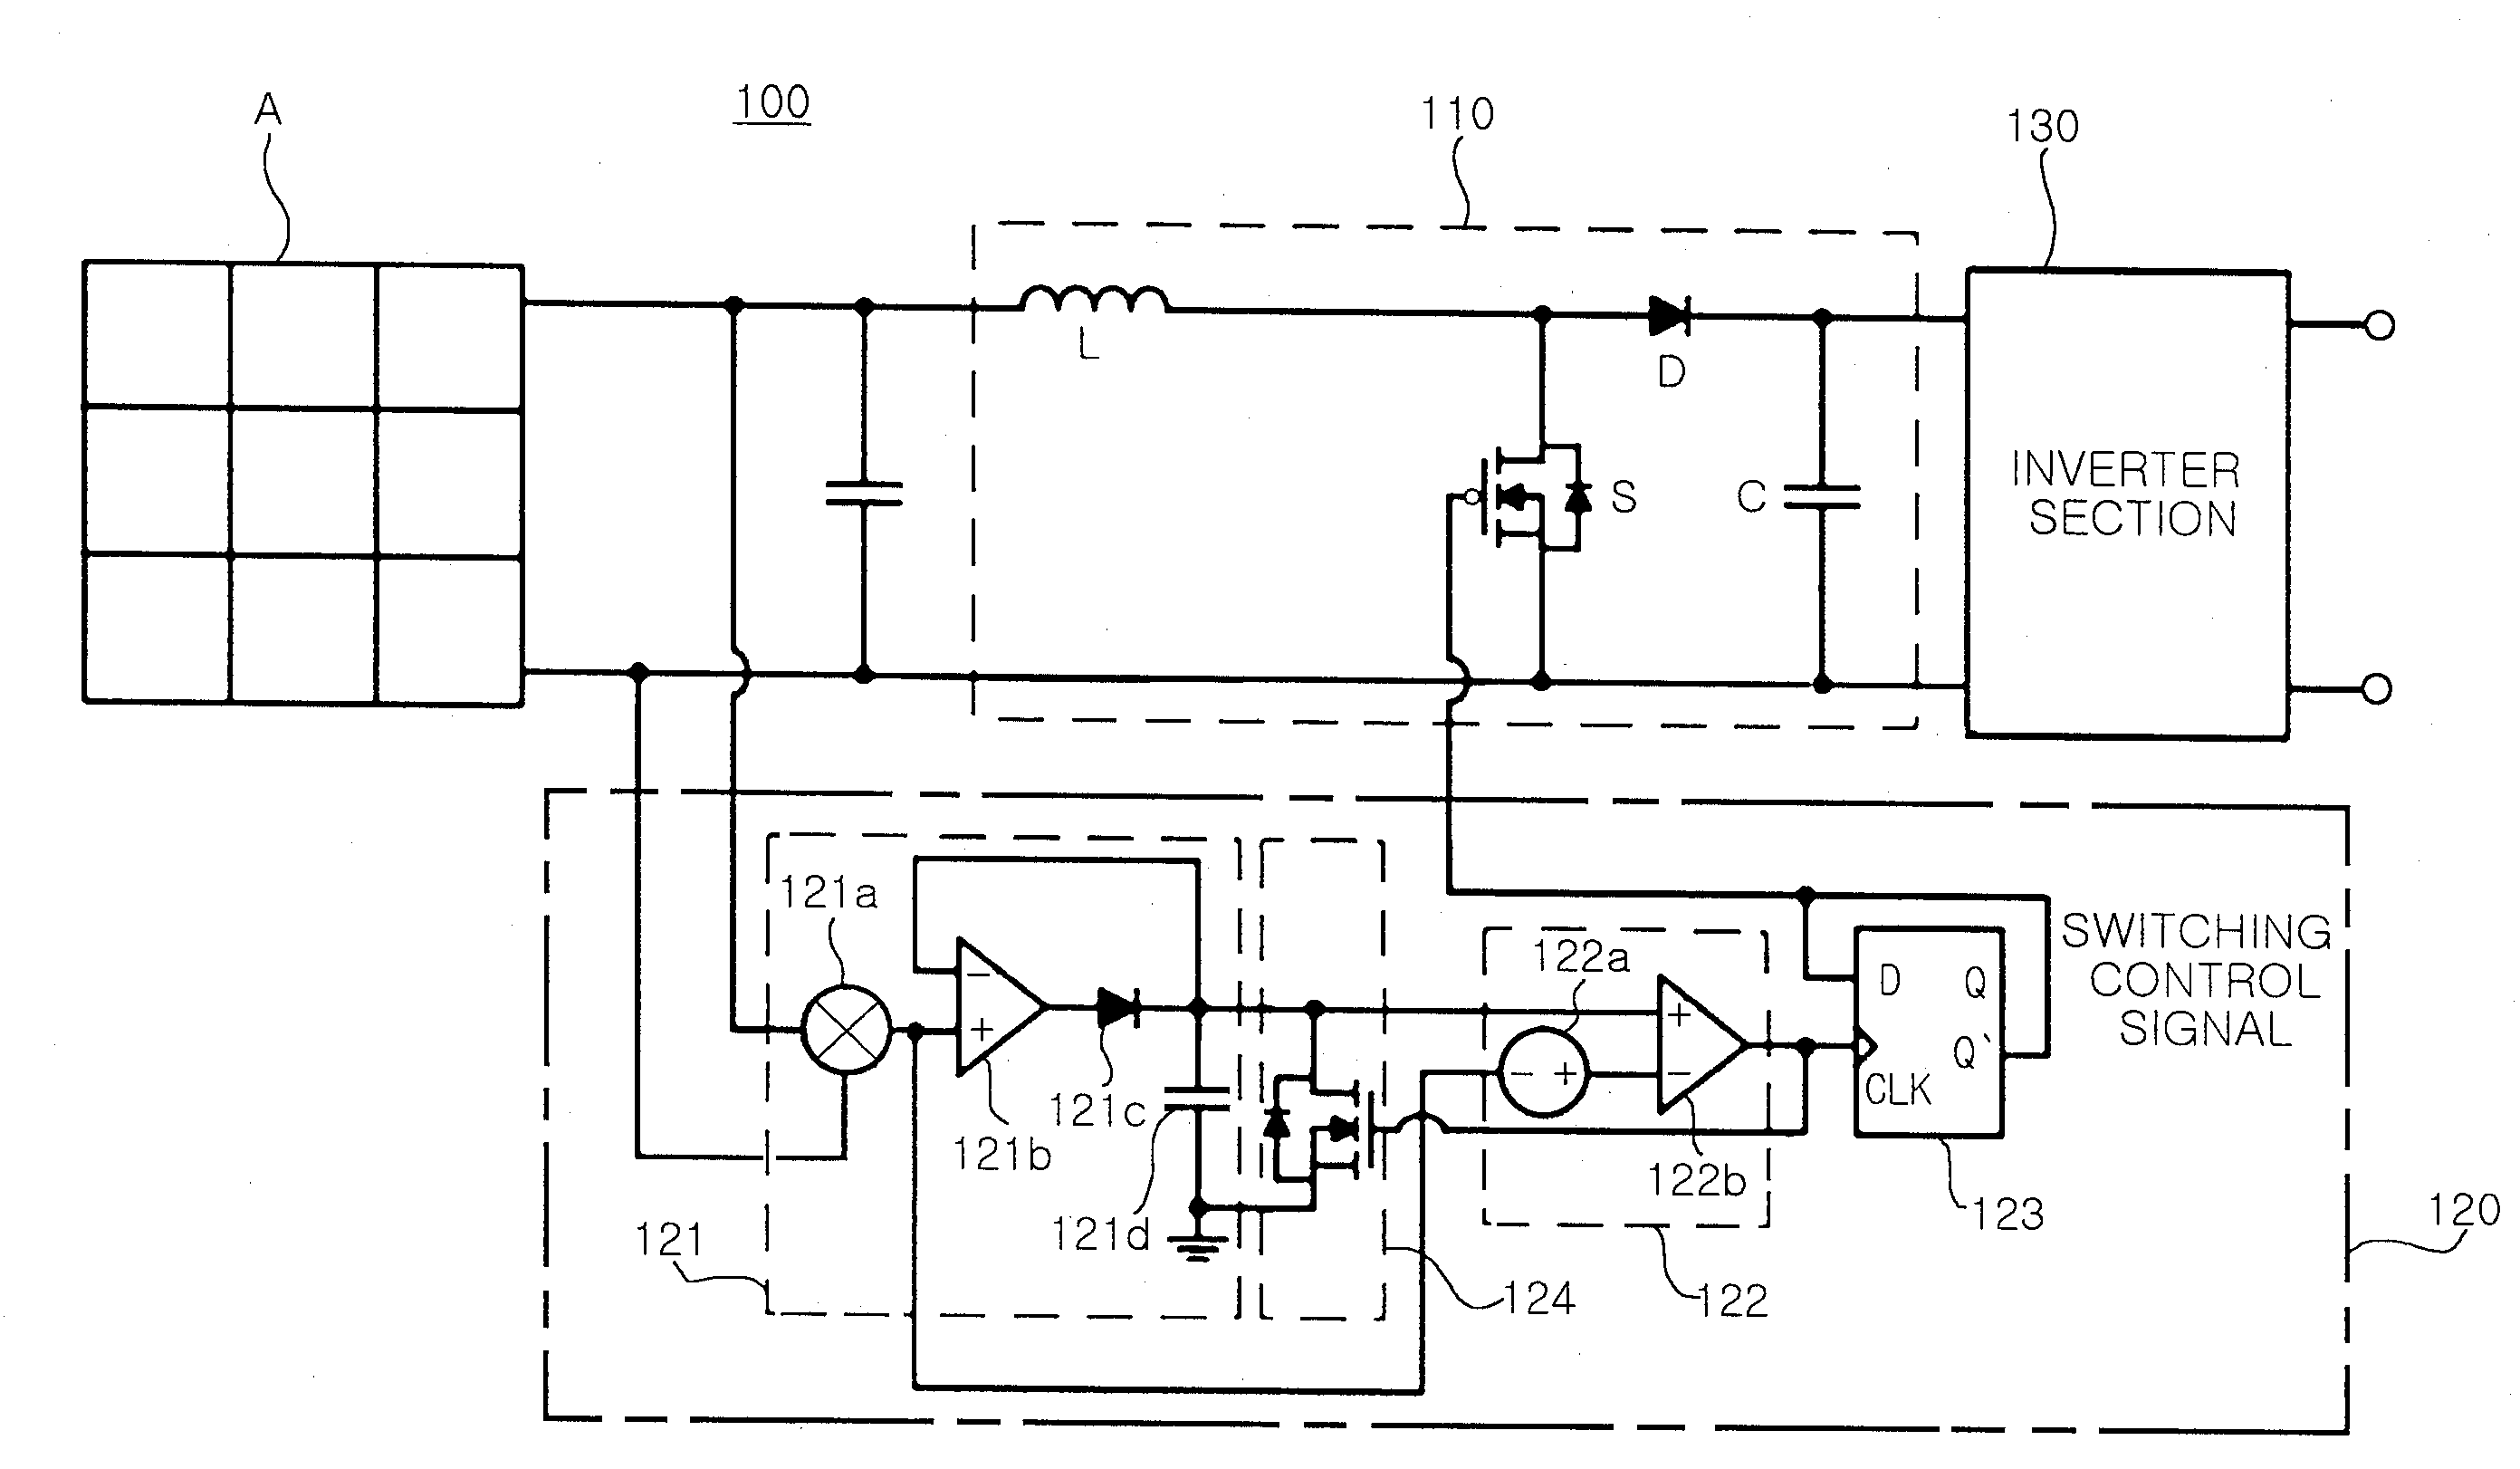 Power supply having maximum power point tracking function